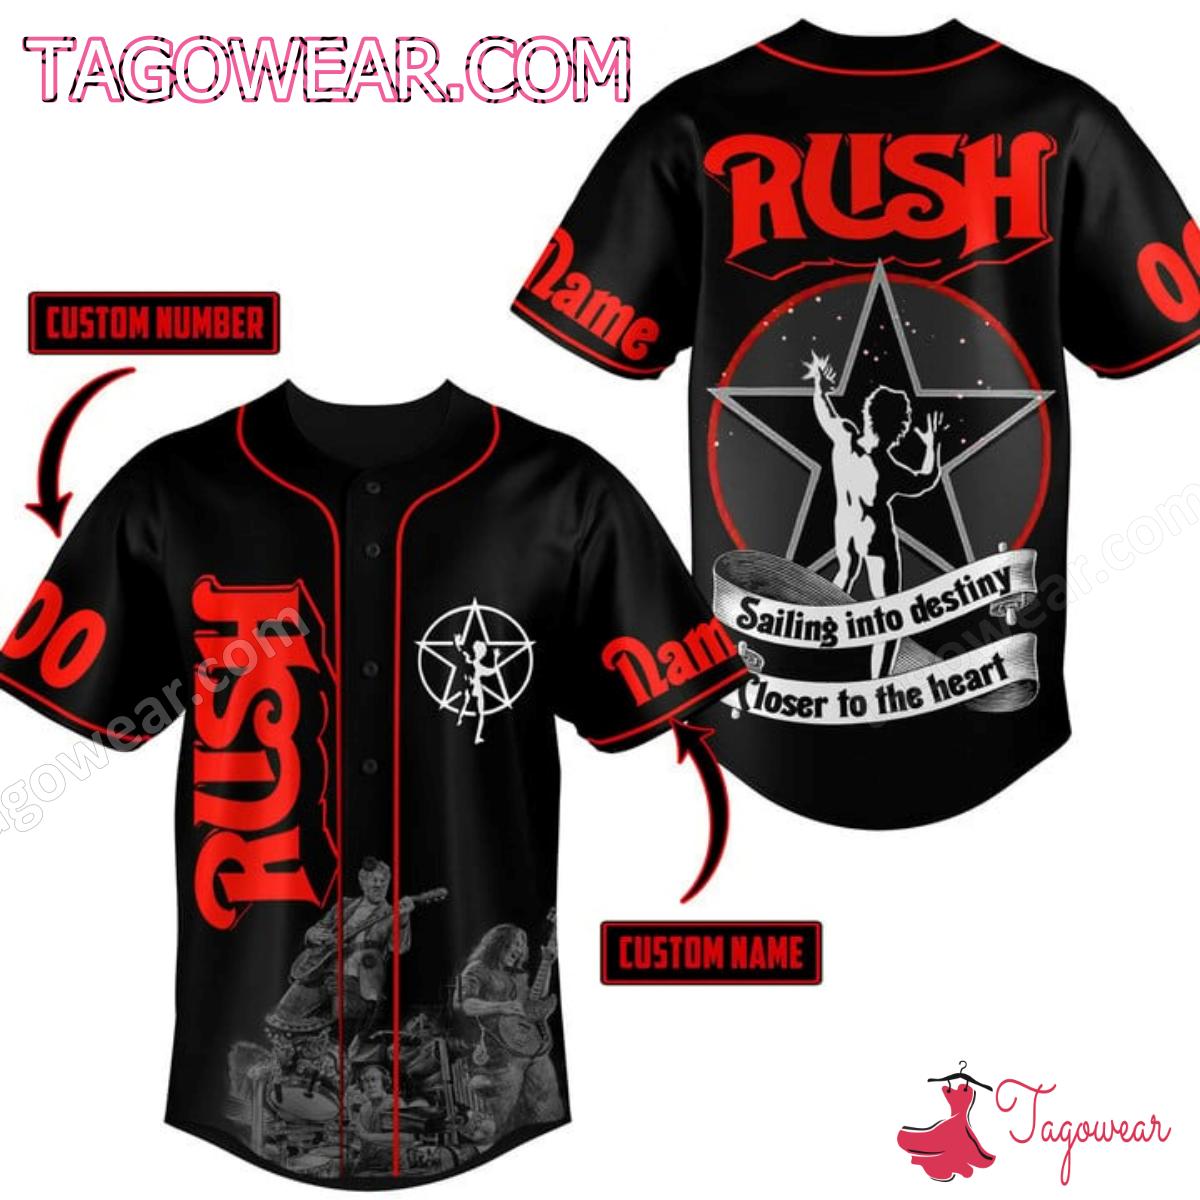 Rush Sailing Into Destiny Closer To The Heart Personalized Baseball Jersey